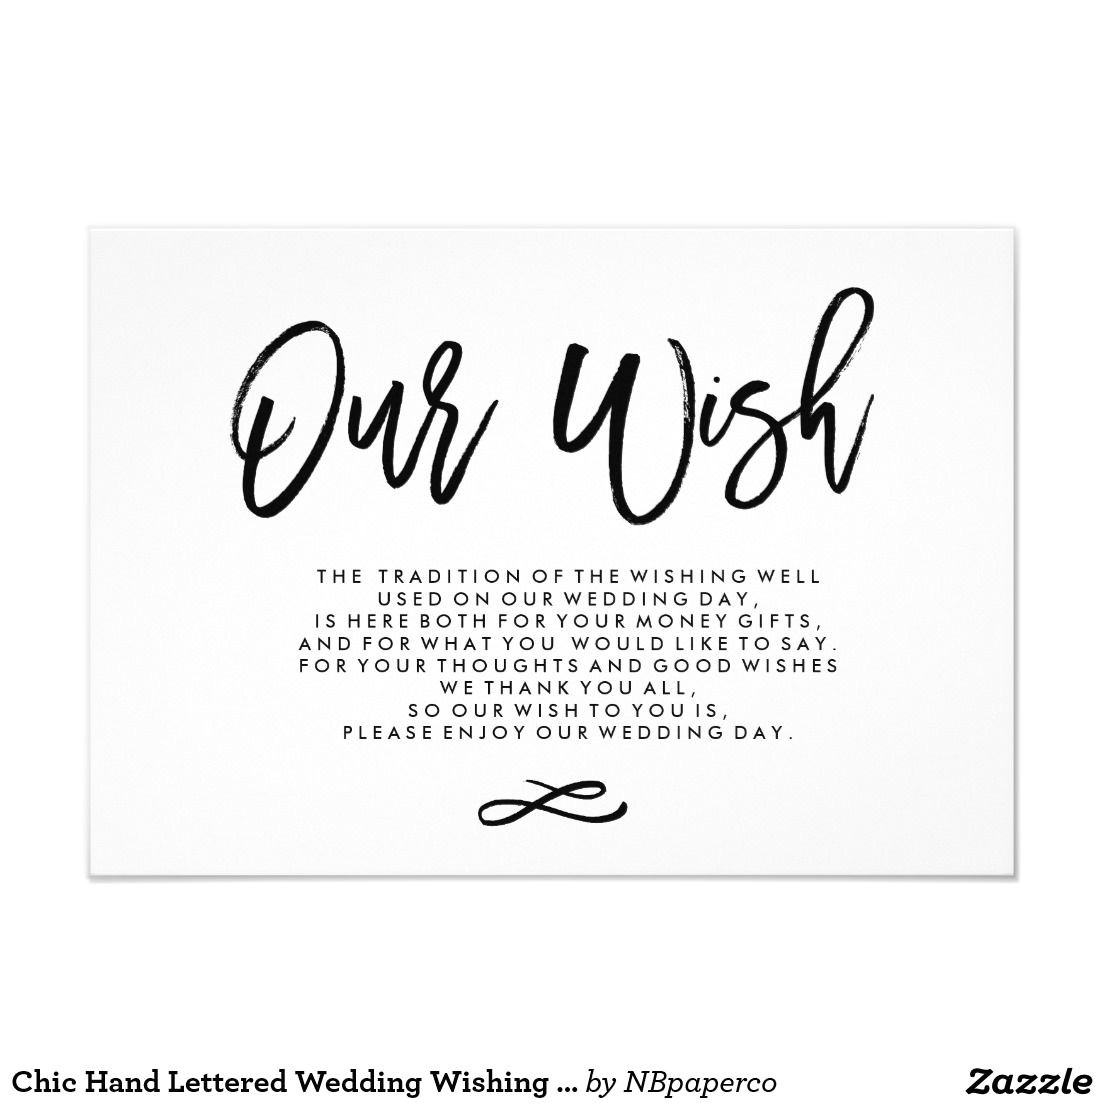 What to Say On A Wedding Card Chic Hand Lettered Wedding Wishing Well Enclosure Card